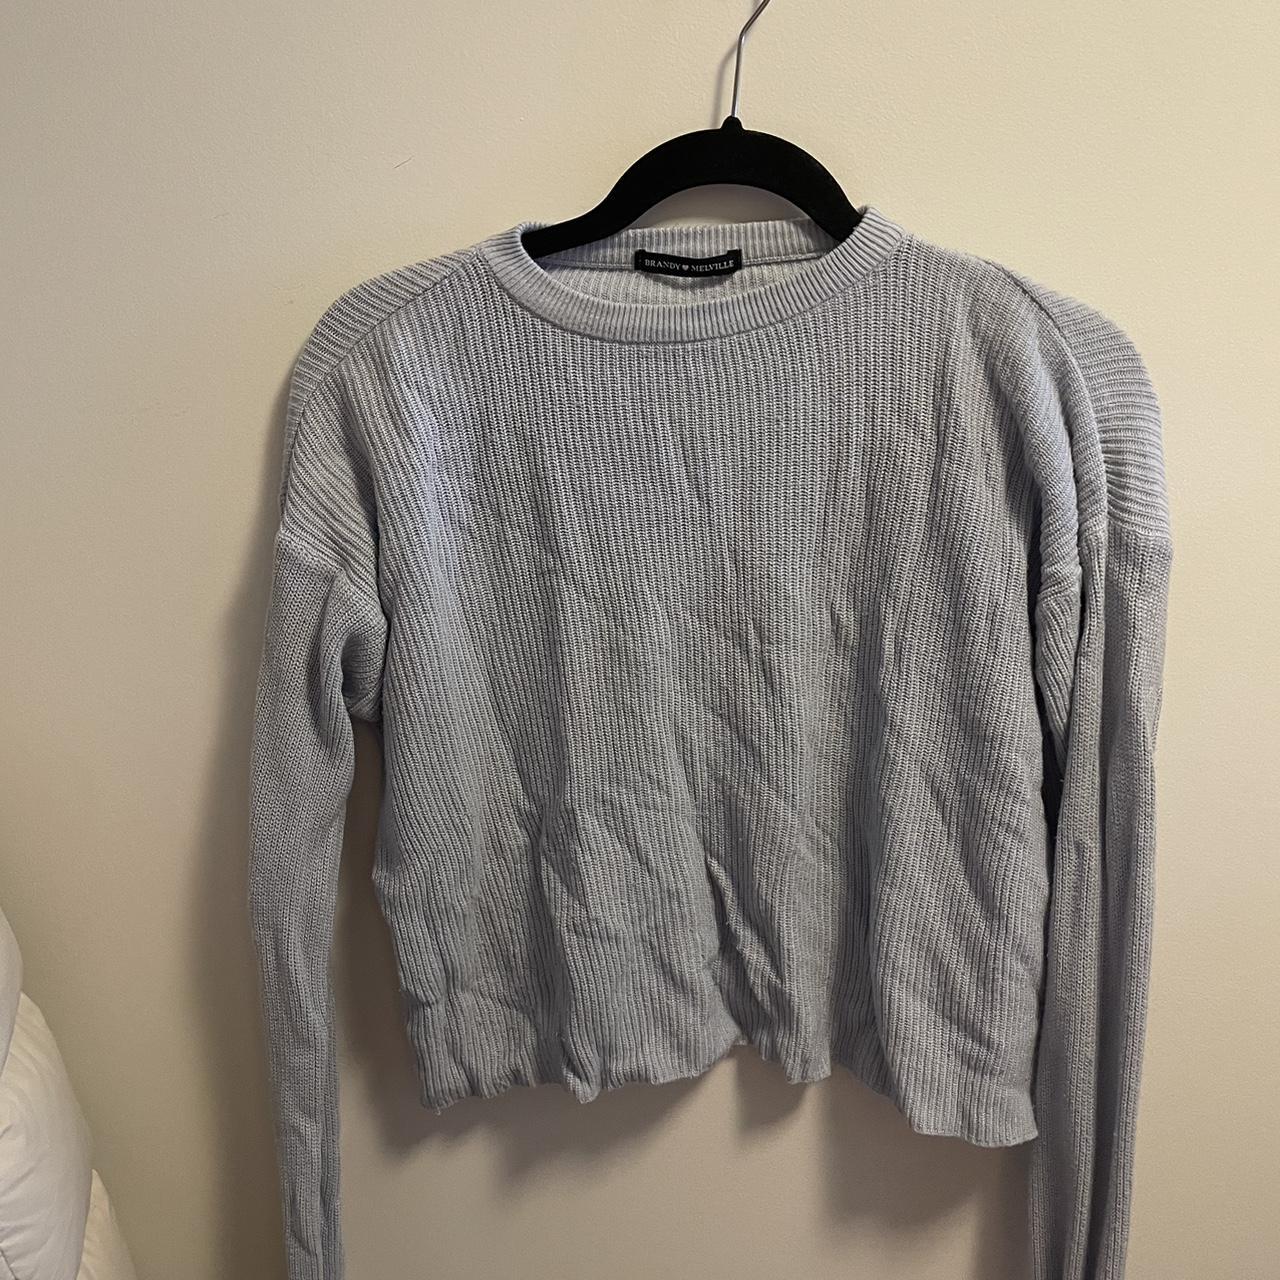 Blue brandy sweater - NOT SOLD ANYMORE! Perf... - Depop